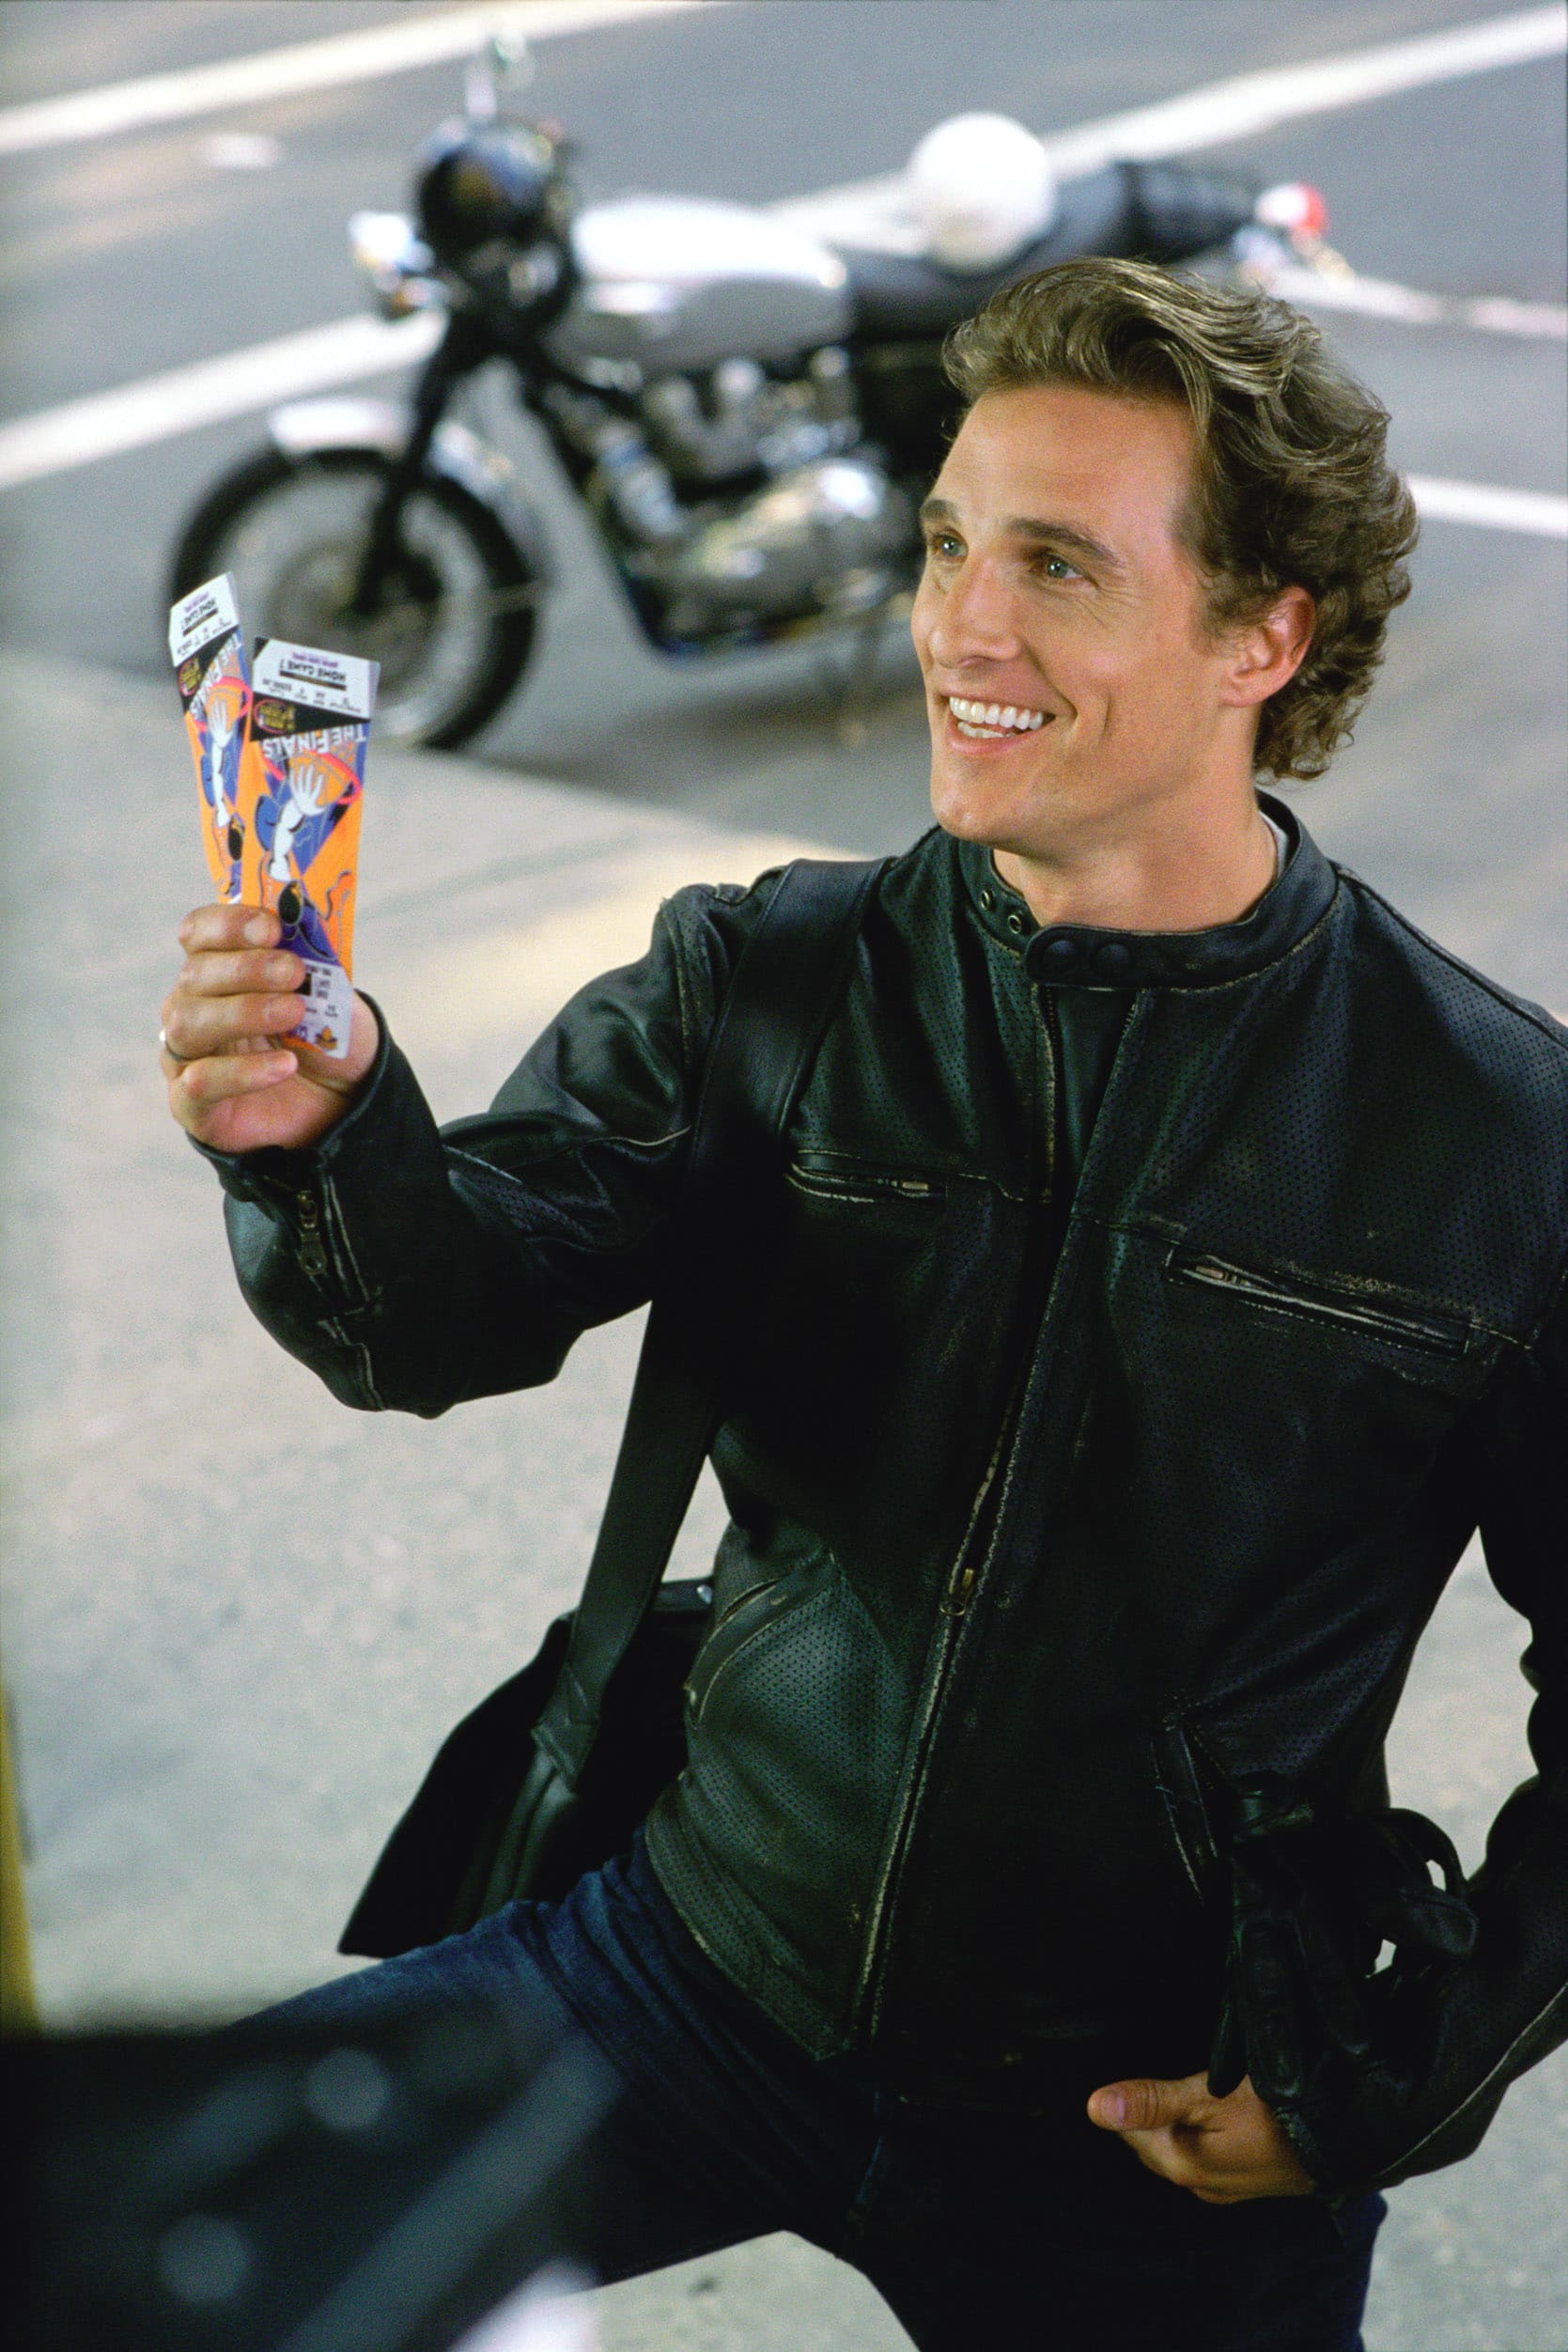 HOW TO LOSE A GUY IN 10 DAYS, Matthew McConaughey, 2003